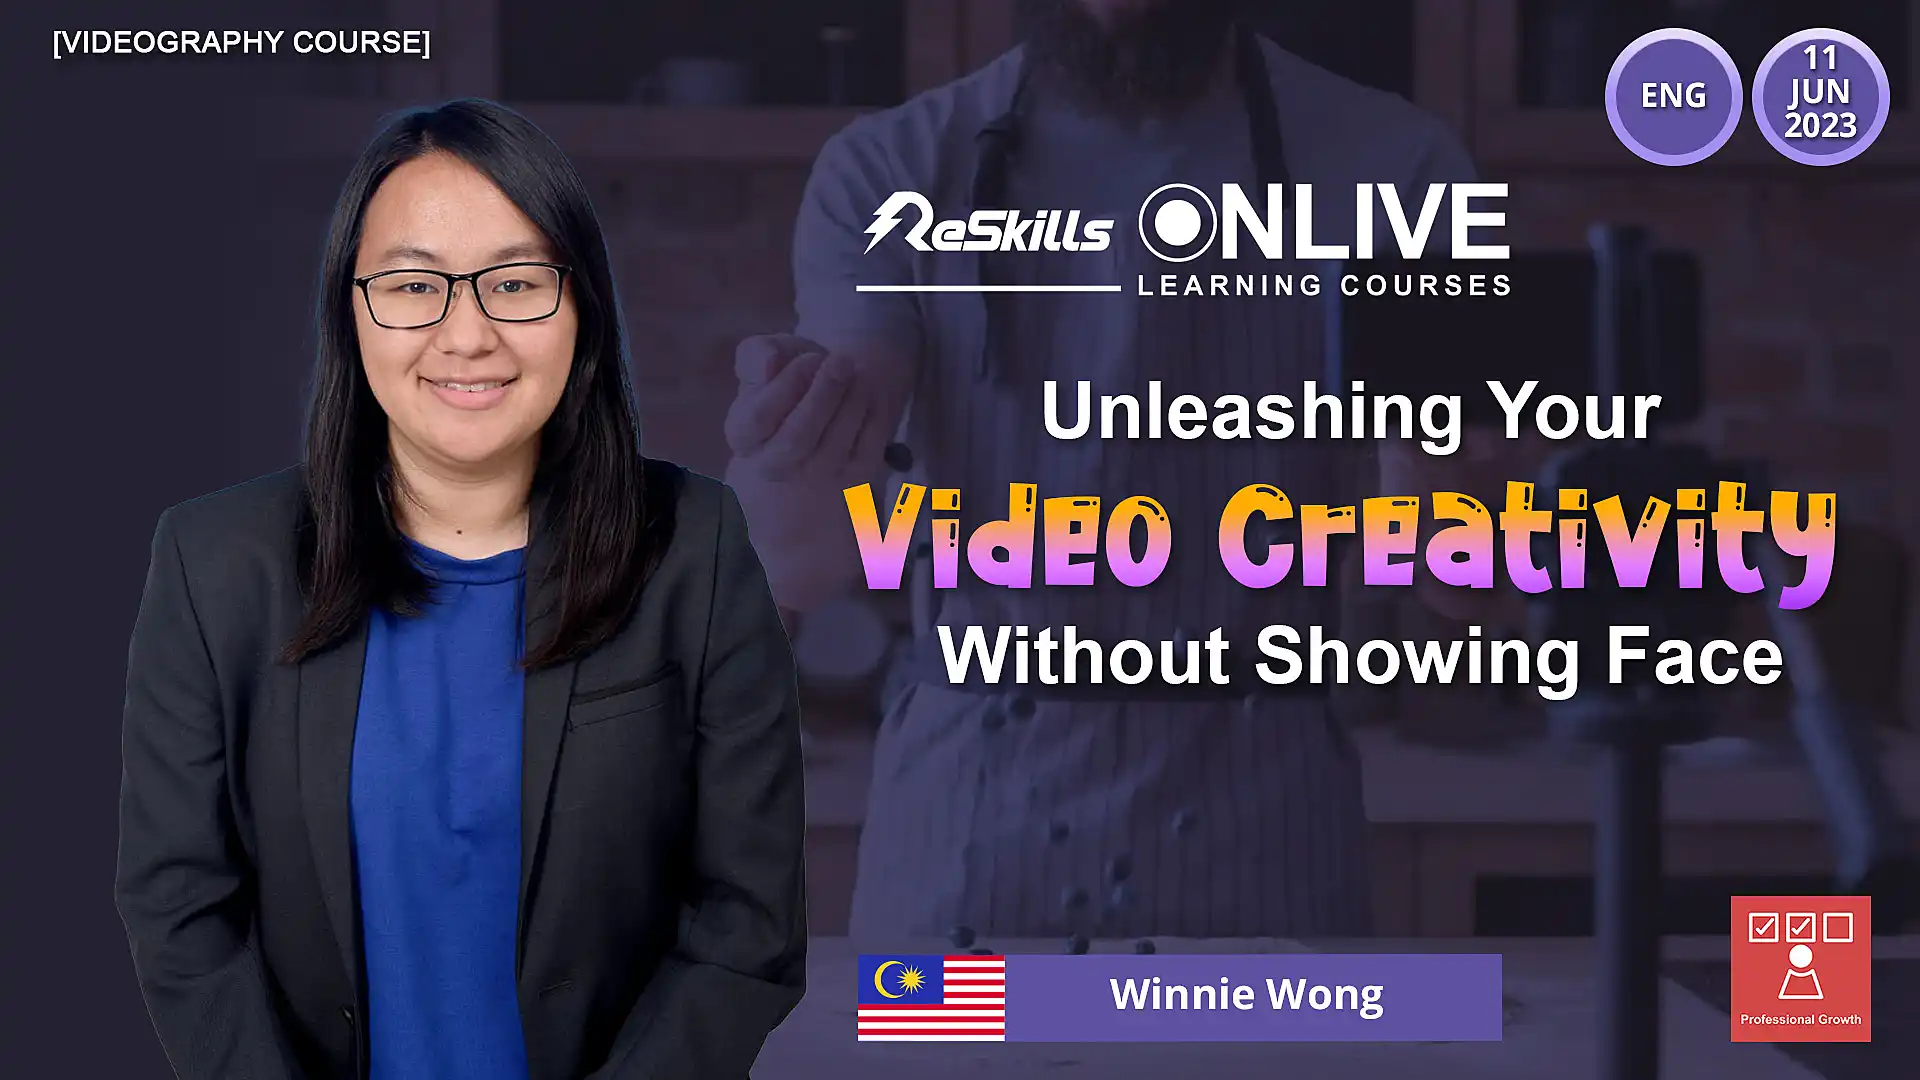 [Videography Course] Unleashing Your Video Creativity Without Showing Face - ReSkills